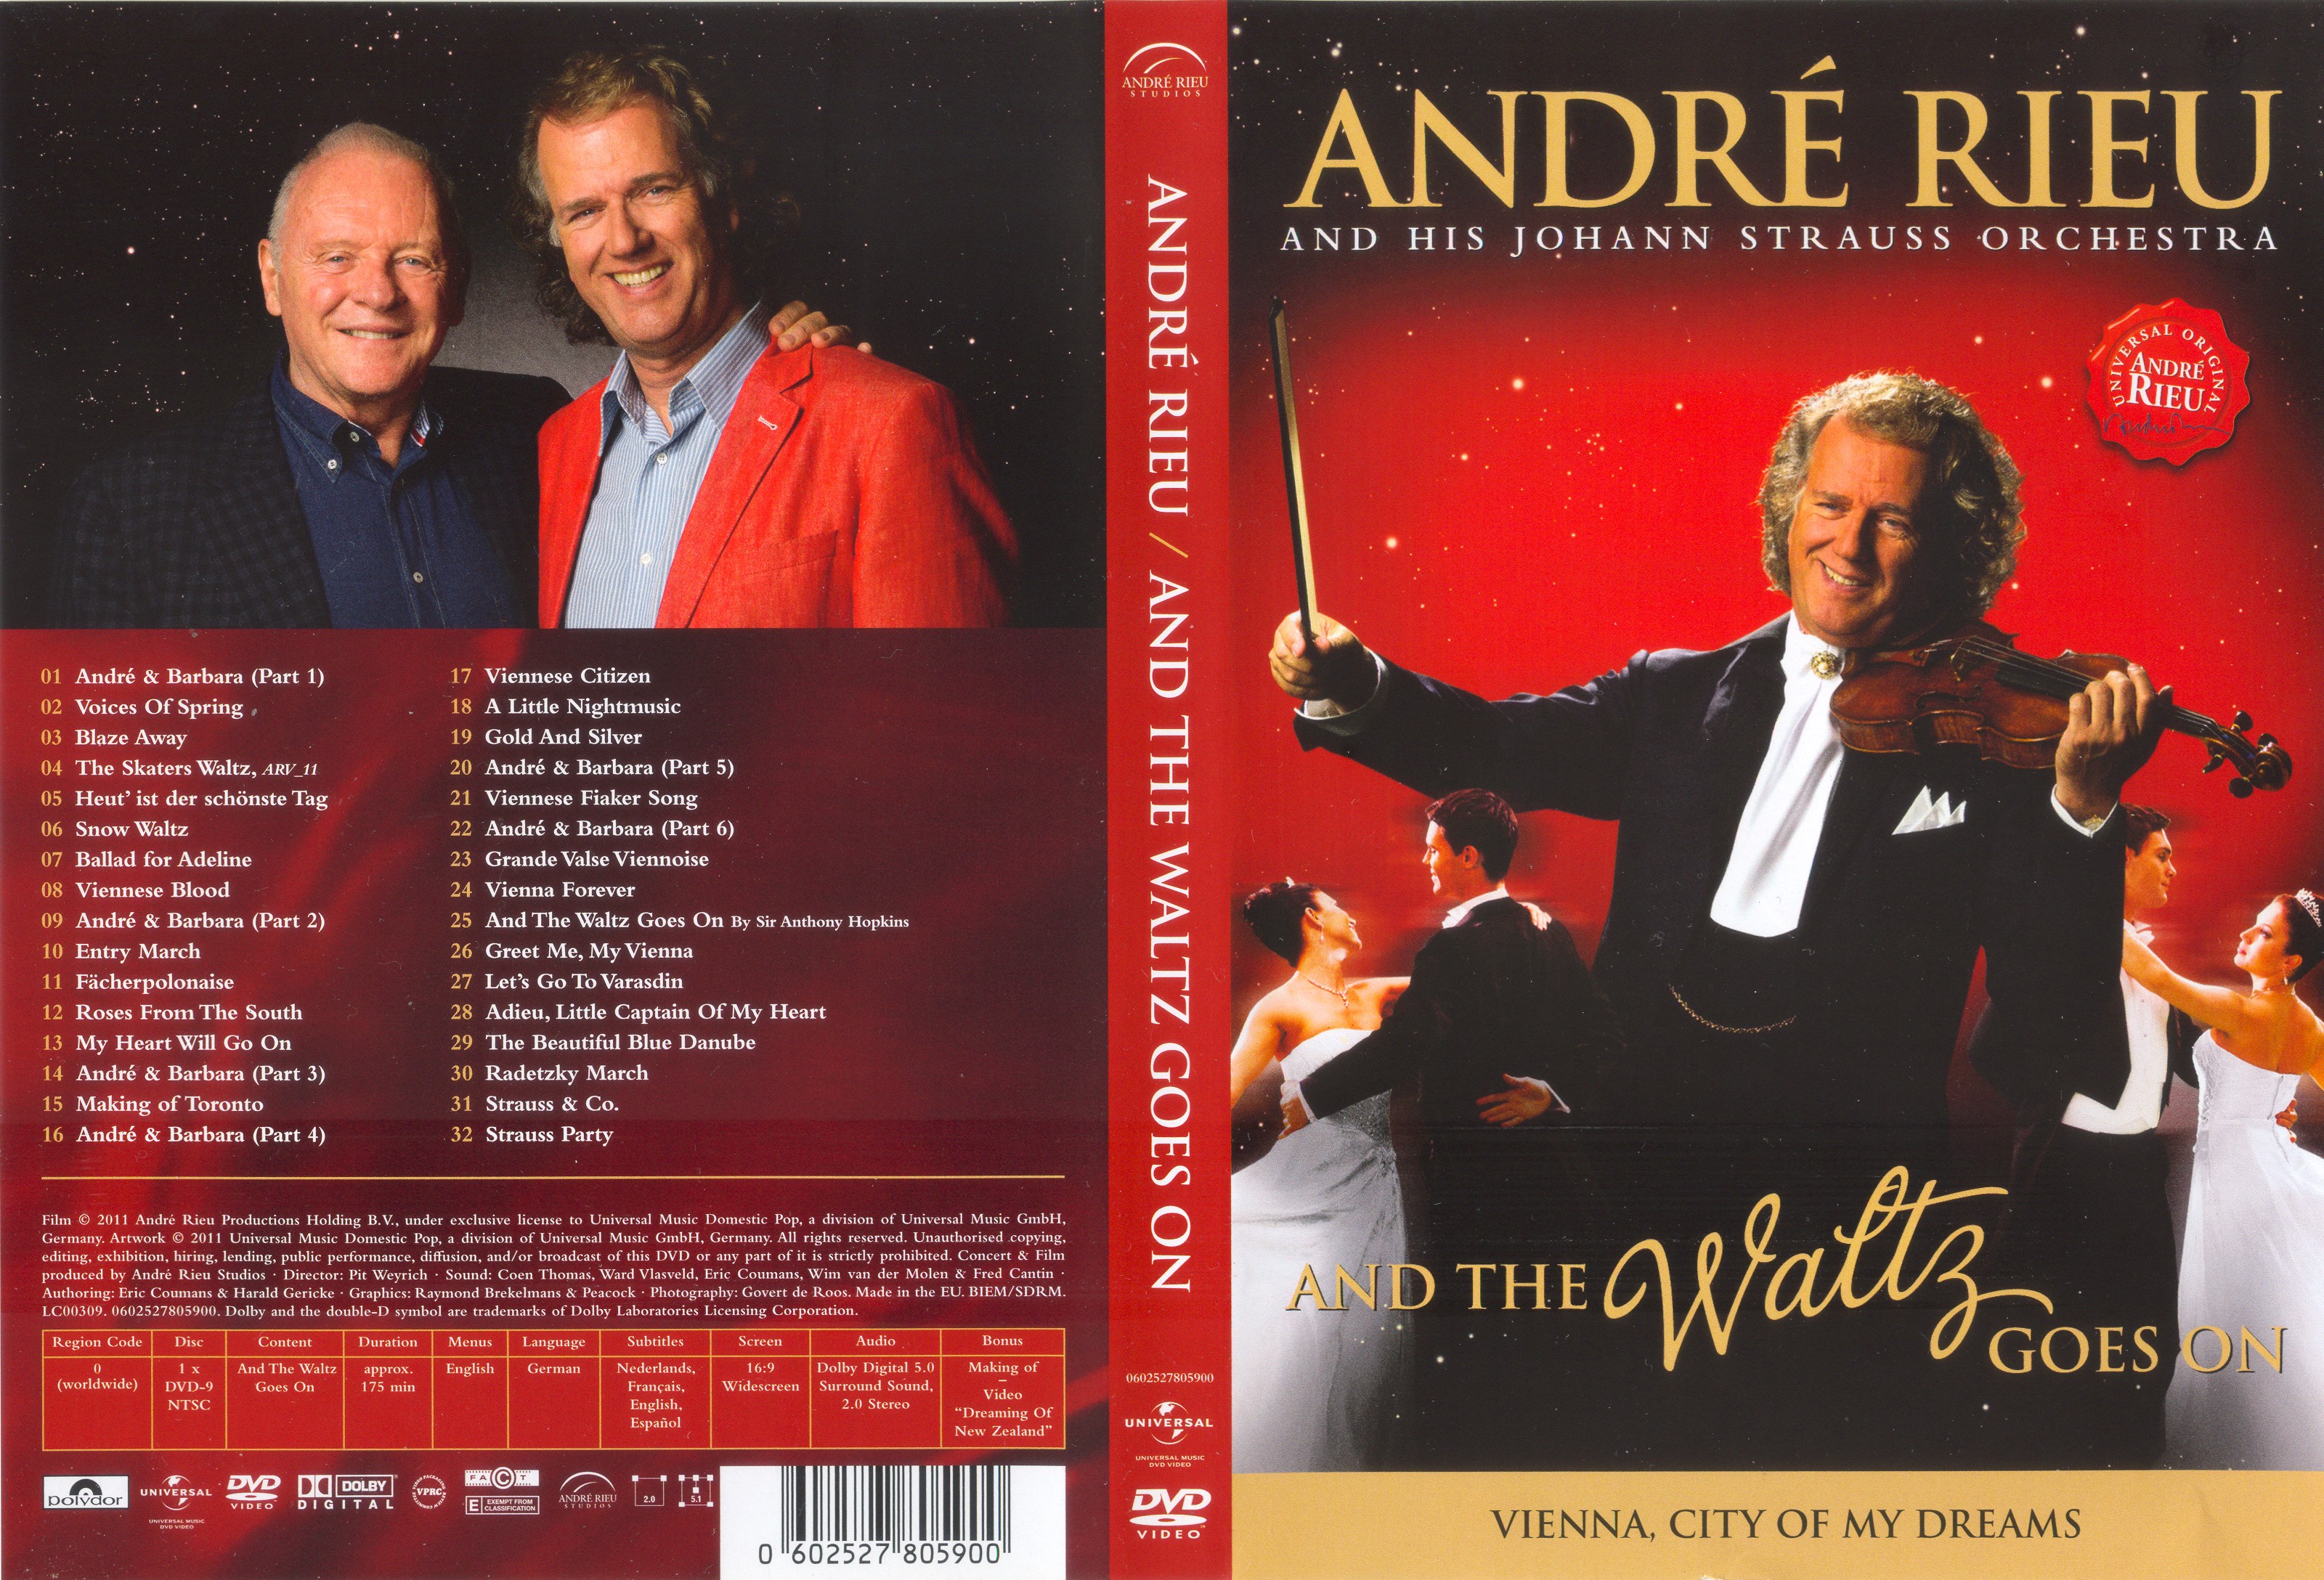 Jaquette DVD Andre Rieu Vienna City of my Dreams